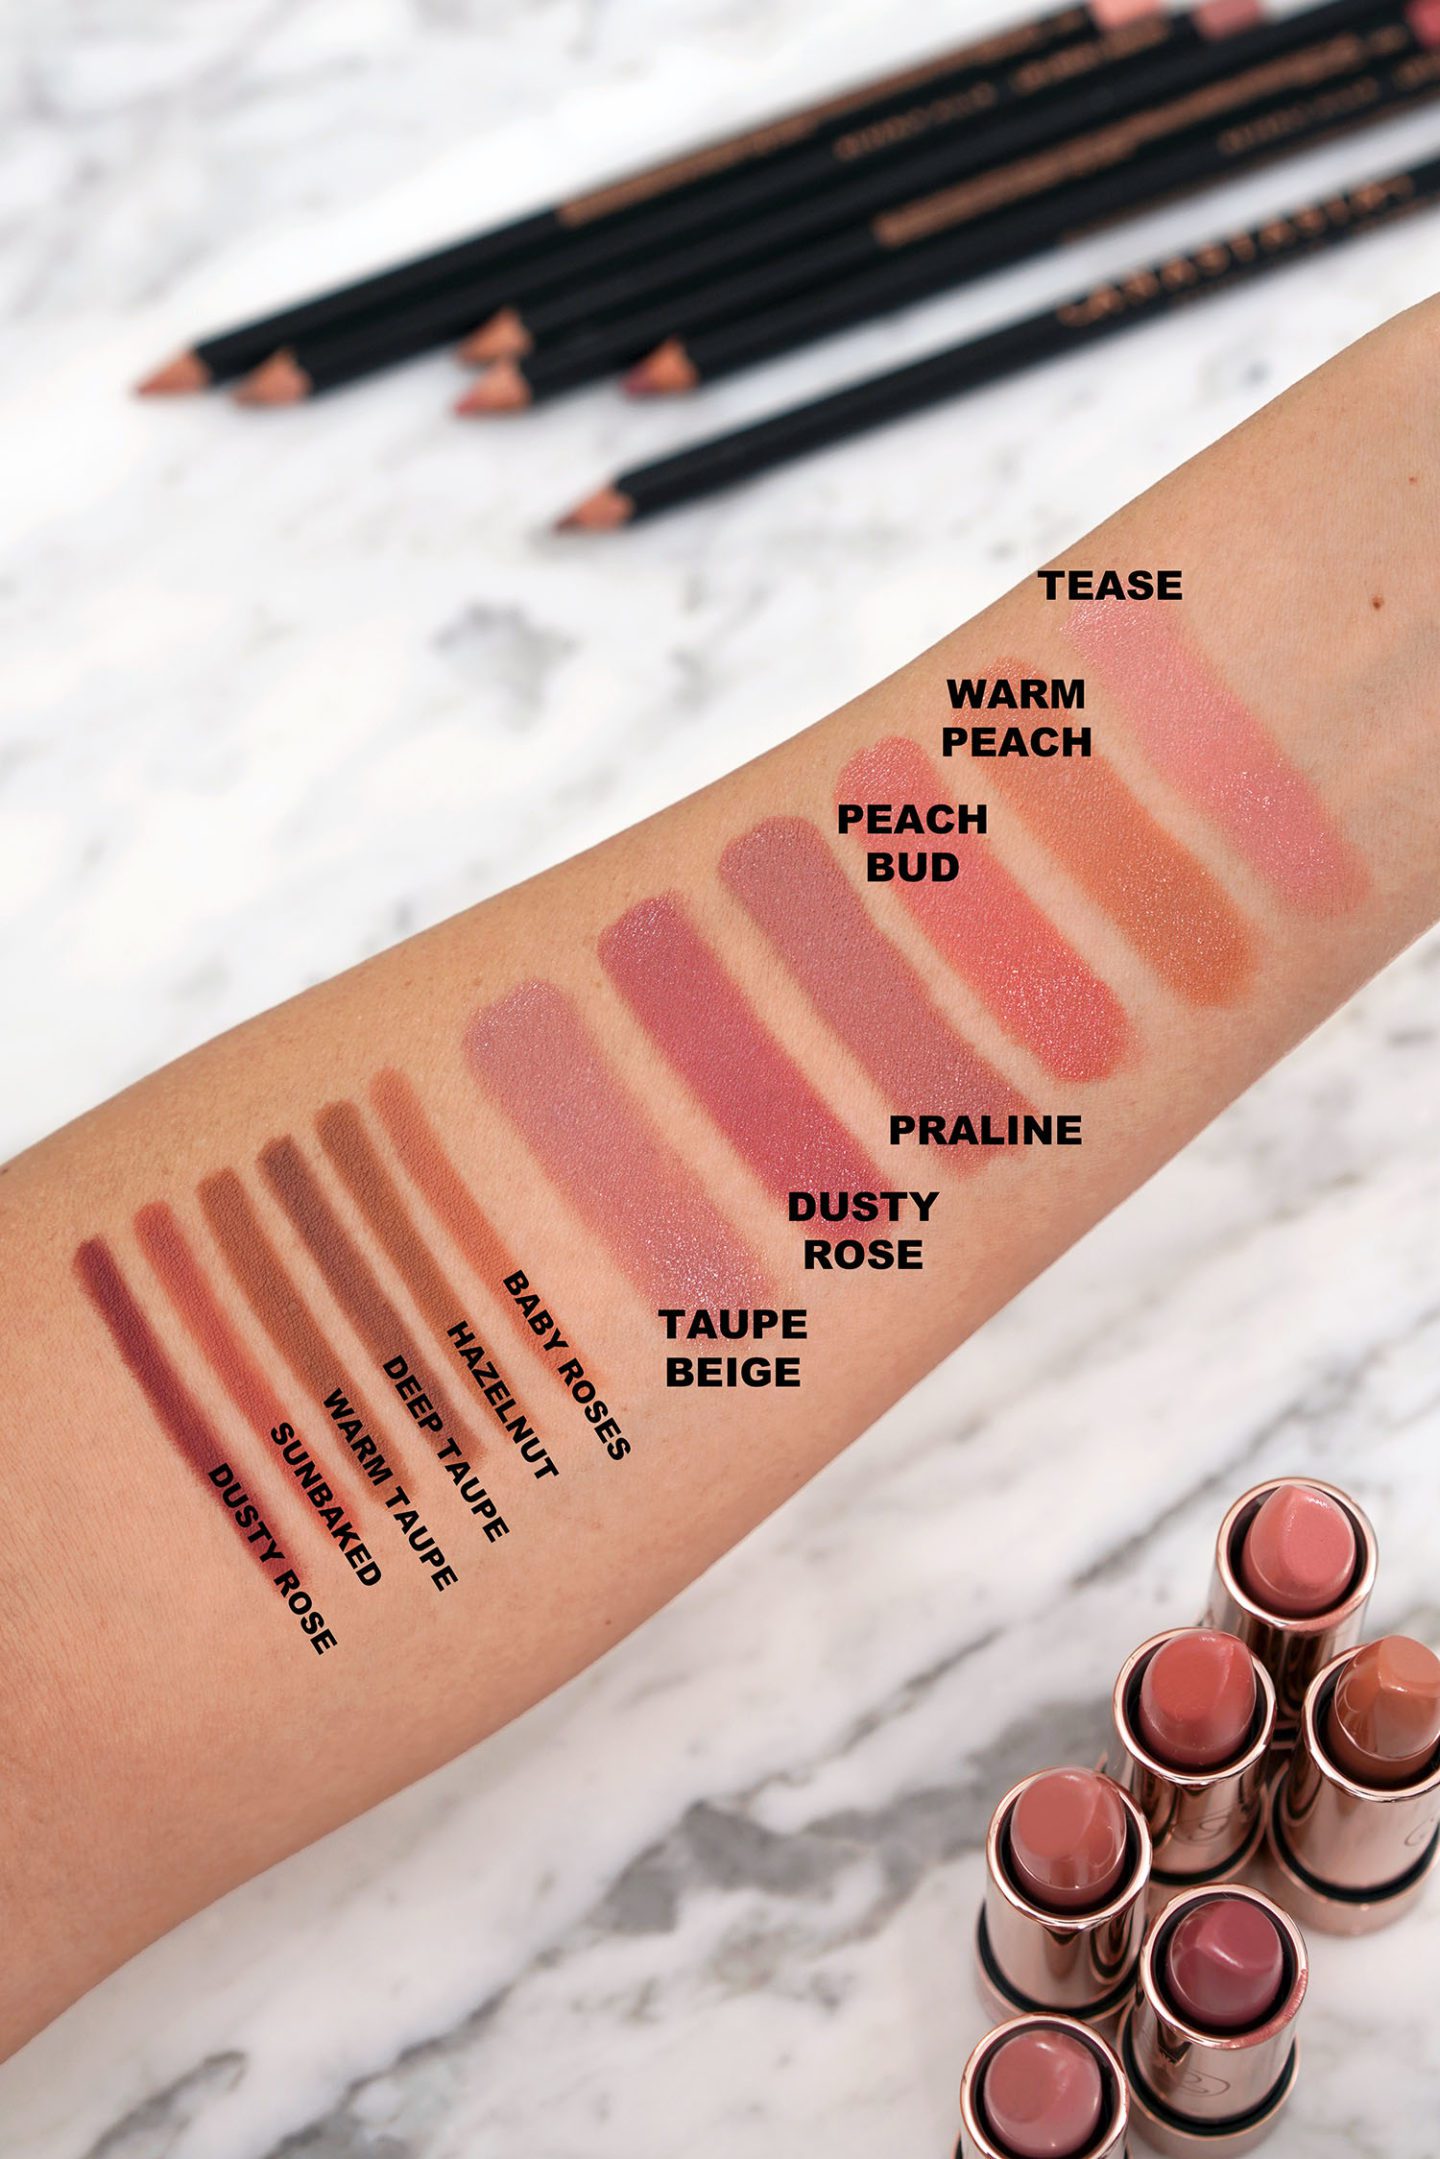 New Anastasia Beverly Hills Lipsticks and Lip Liners swatches